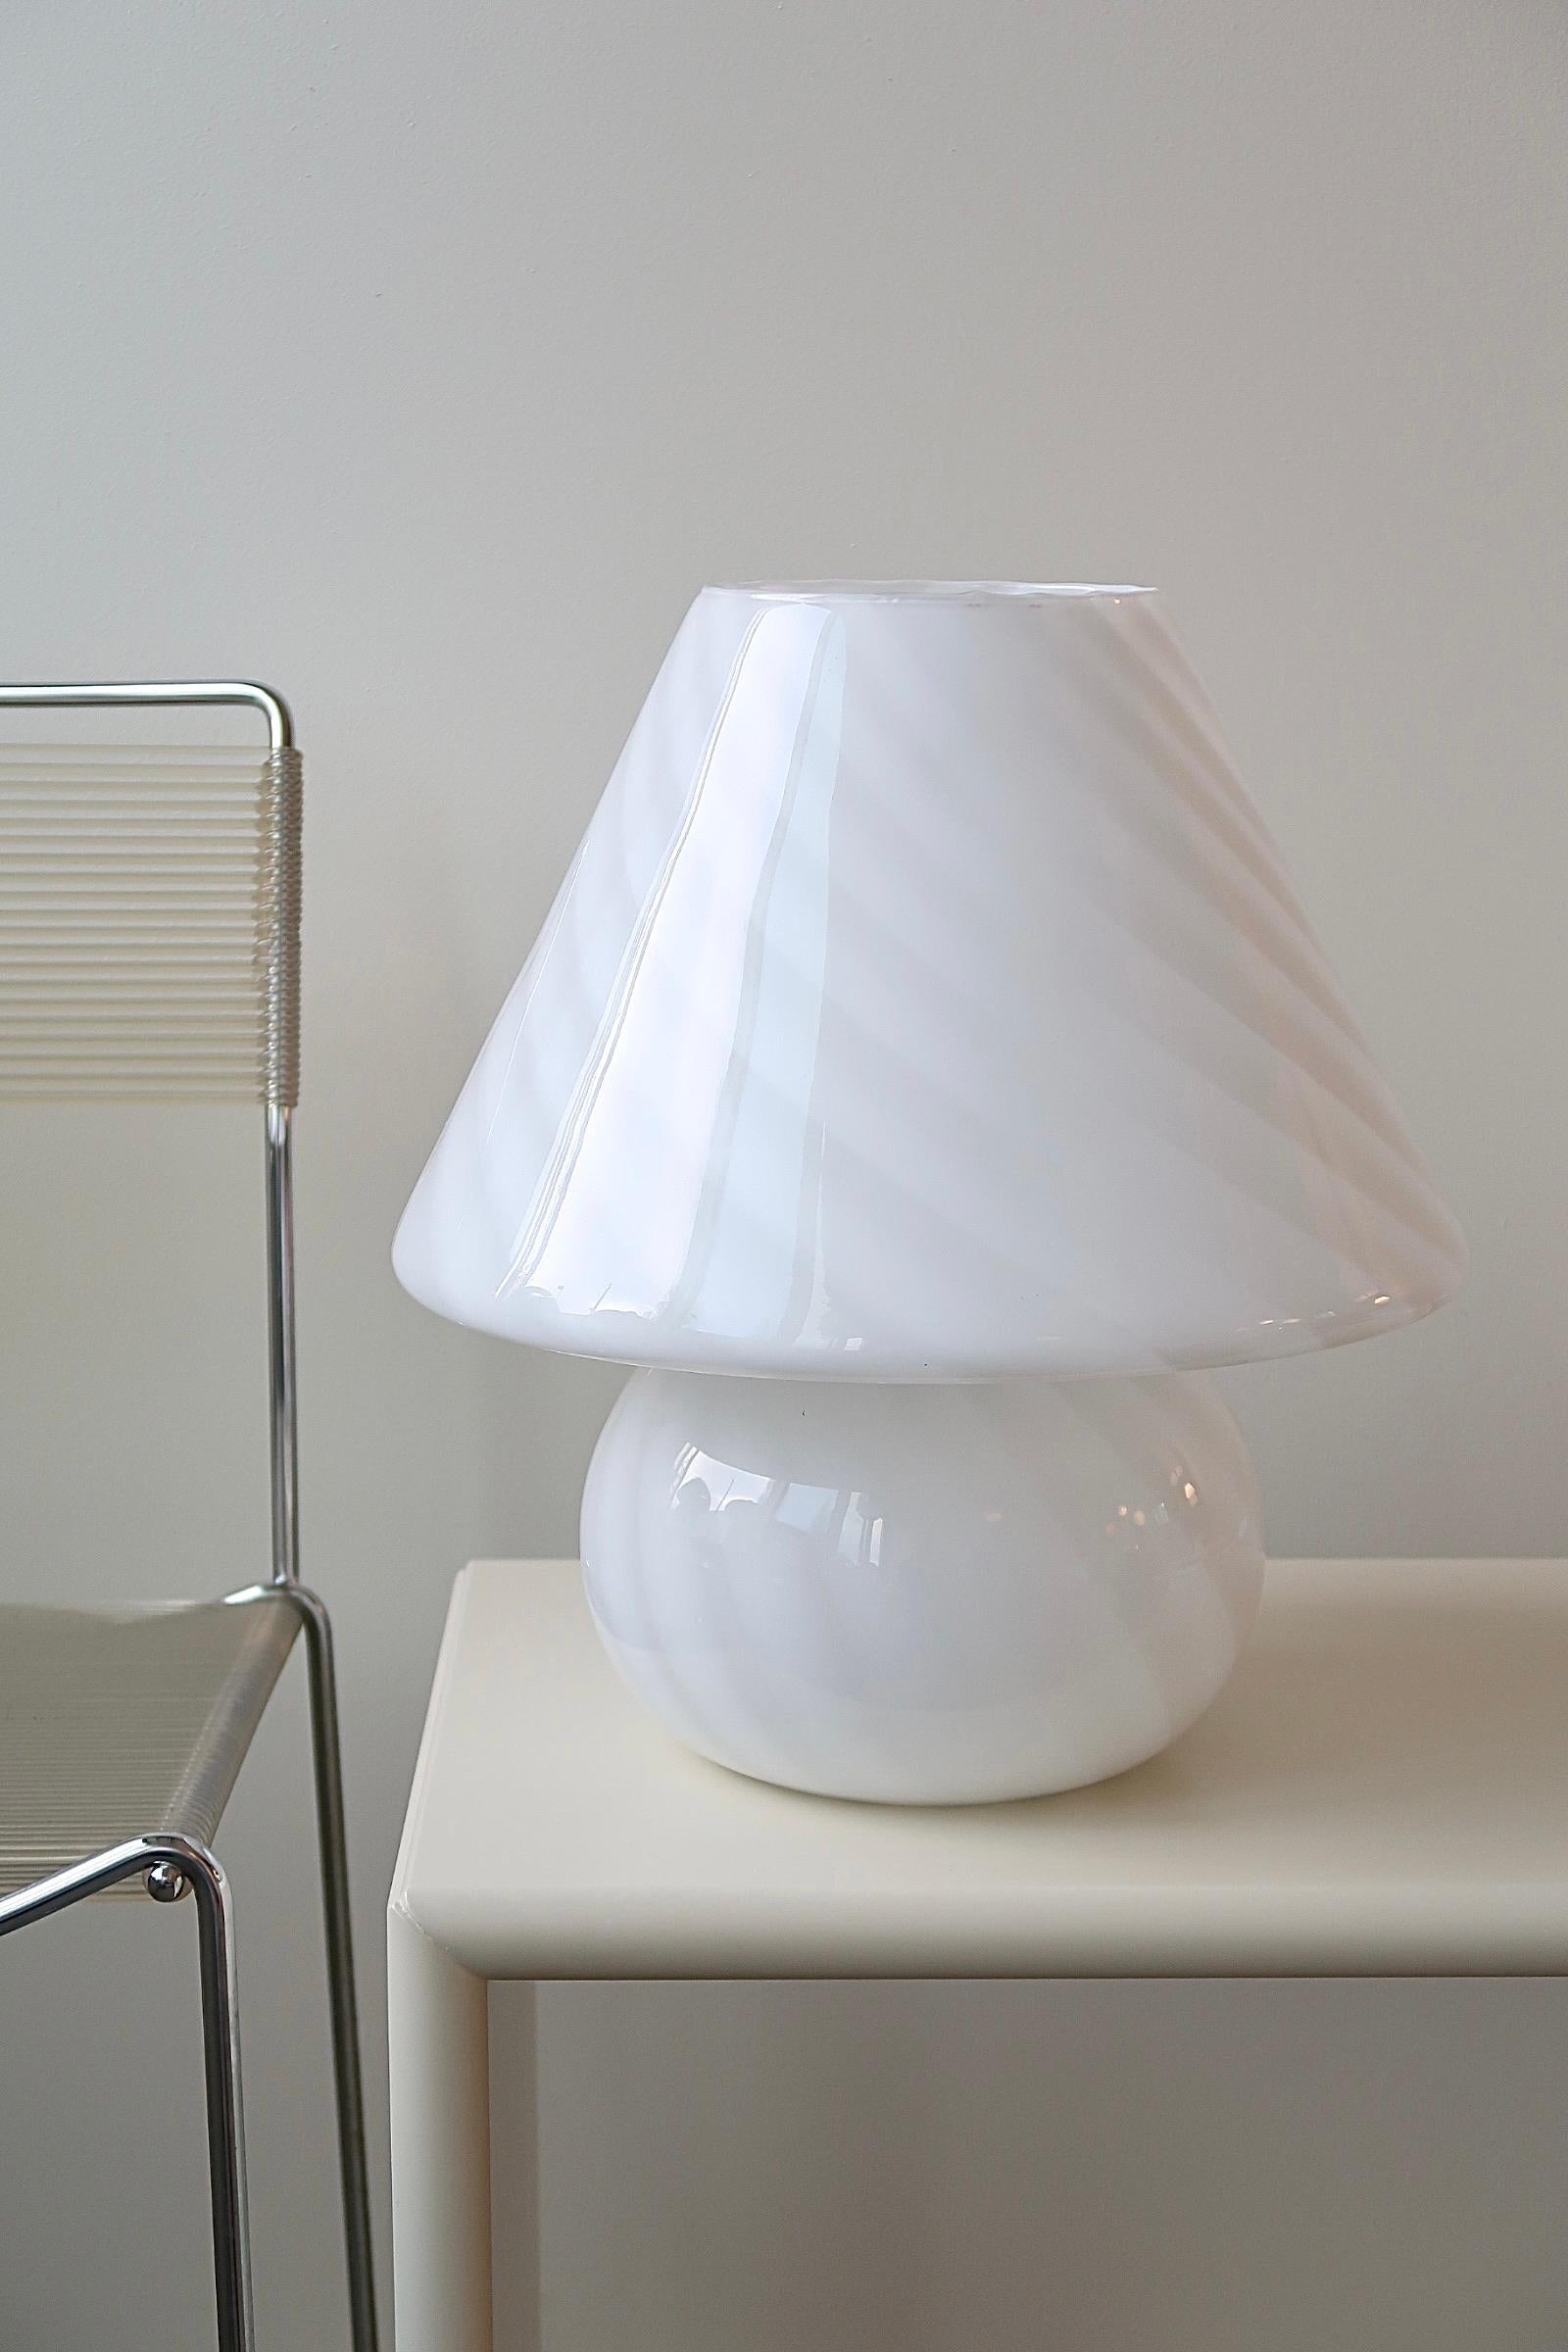 Extra large vintage Murano mushroom lamp with swirl. Mouth blown in white glass. Handmade in Italy, 1970s, and comes with new white cord. ??

H:40cm D:35cm